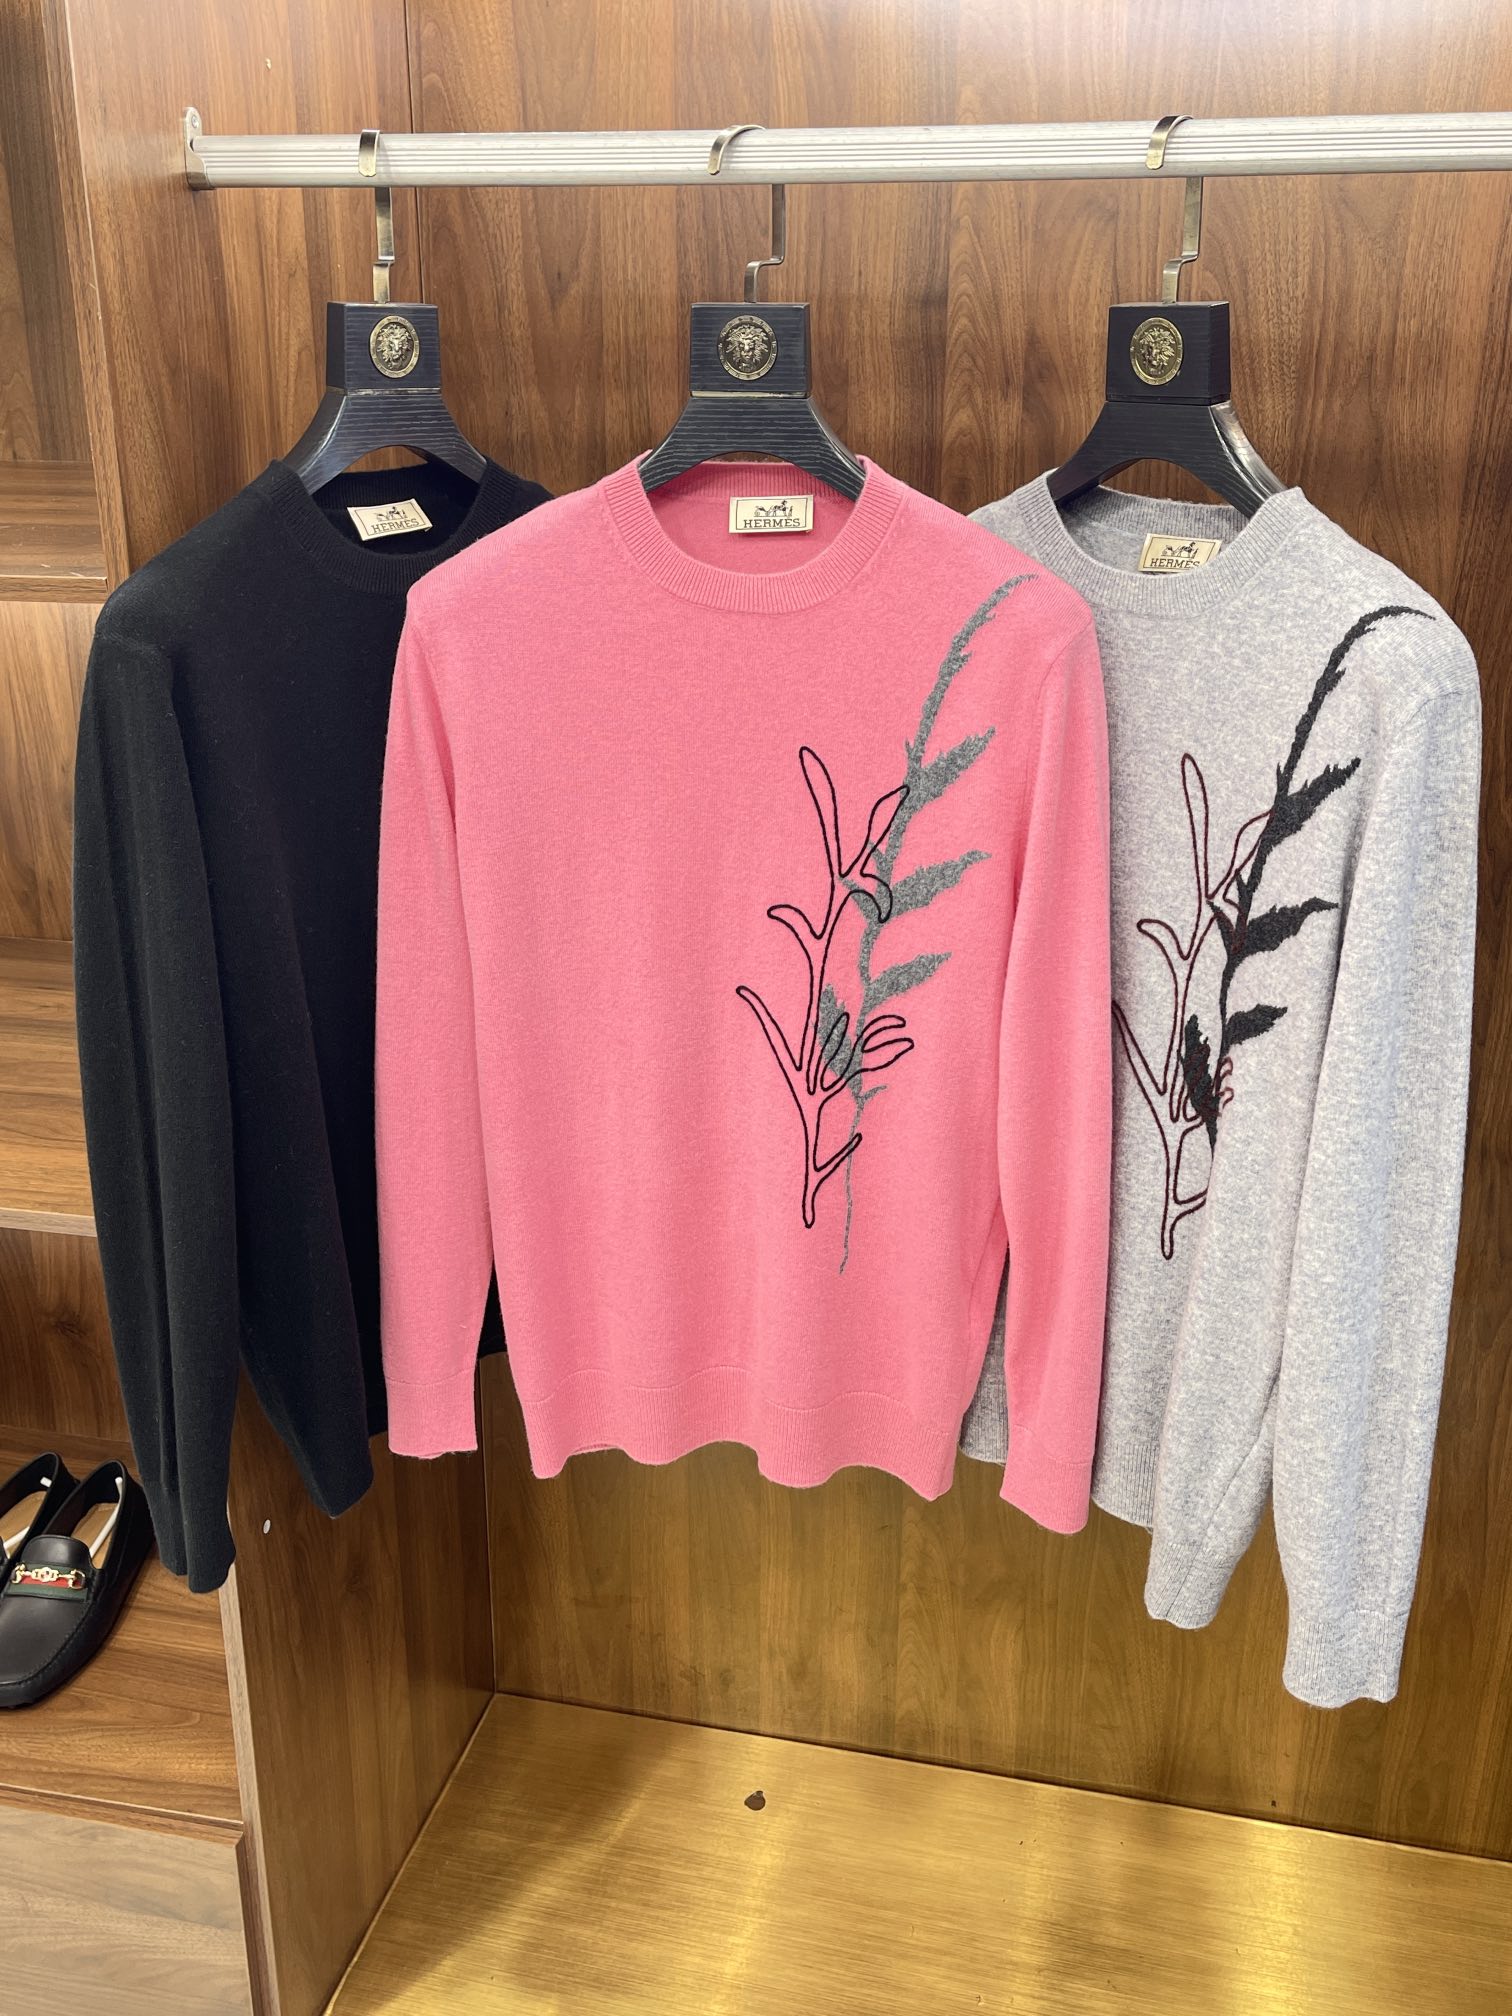 Hermes Clothing Sweatshirts Top Quality Replica
 Cashmere Knitting Fall/Winter Collection Fashion Casual